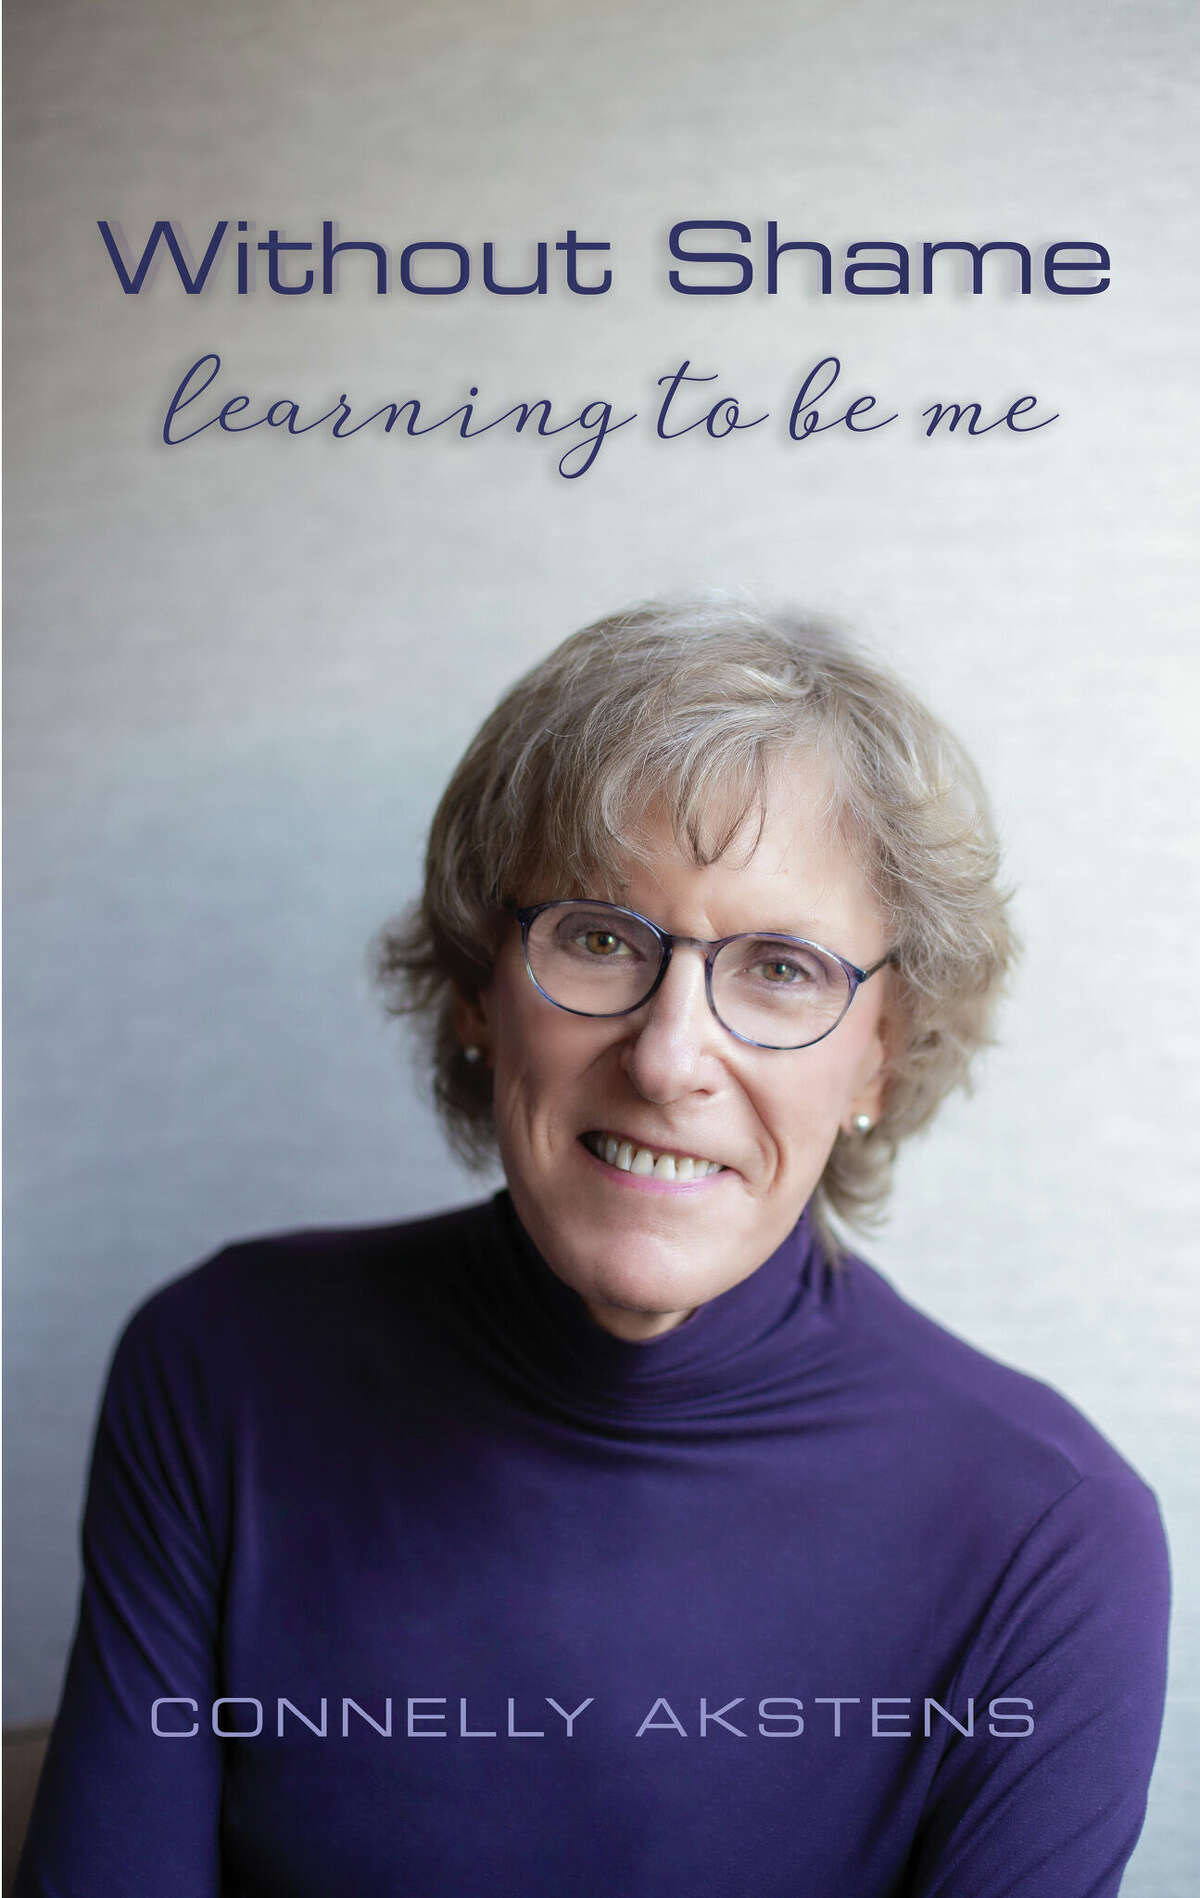 Connelly Akstens, an educator, folk musician and more, has come out with her memoir, "Without Shame: Learning to be Me."